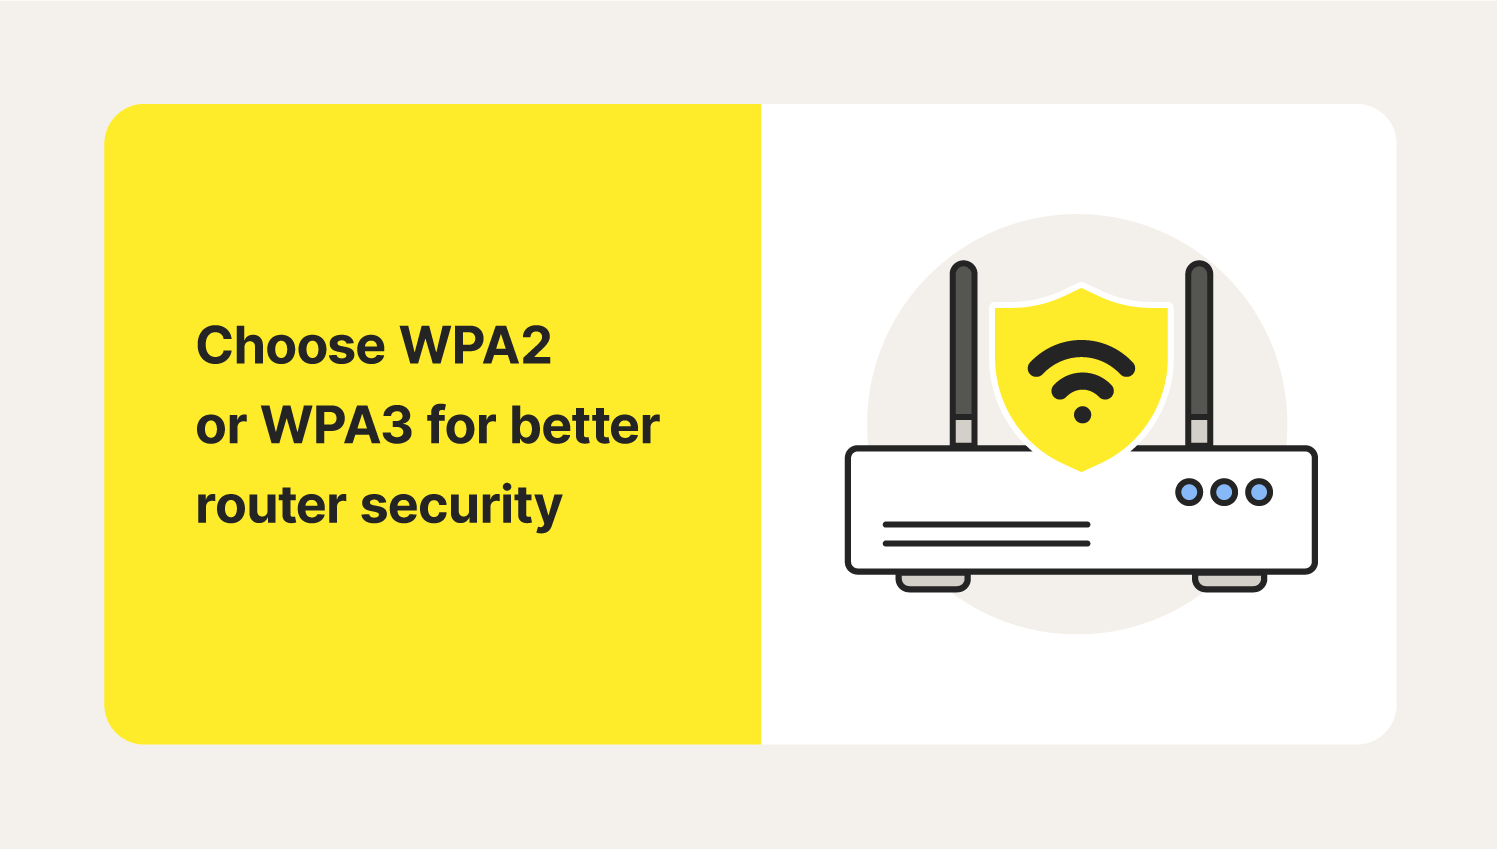 A router uses WPA2 or WPA3 security after you learn how to change your Wi-Fi router password.